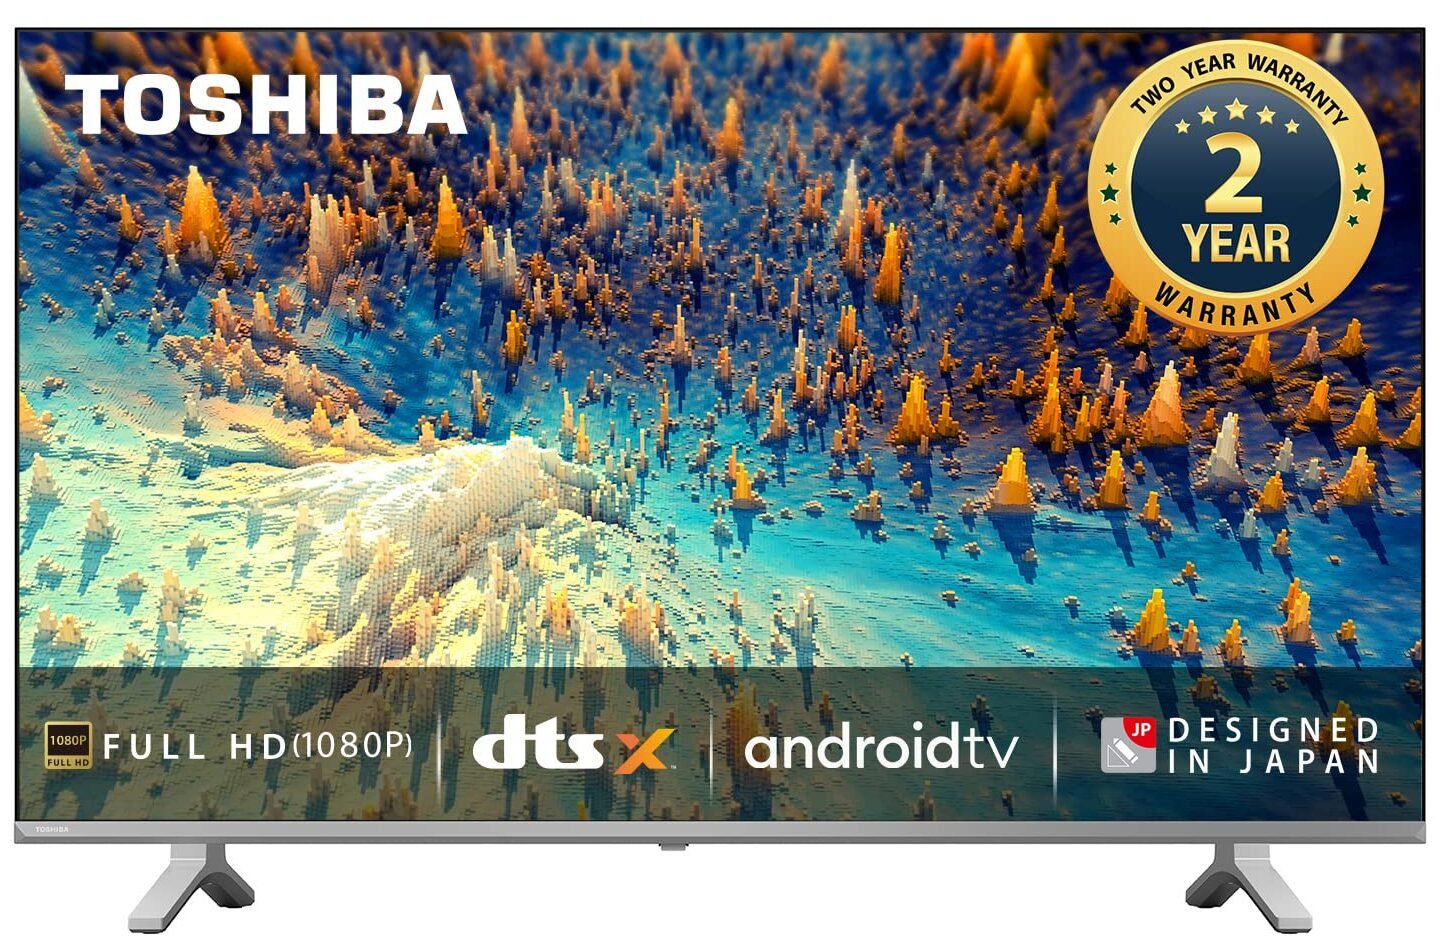 Toshiba 108 cm (43 inches) V Series Full HD Smart Android LED TV 43V35KP (Silver)